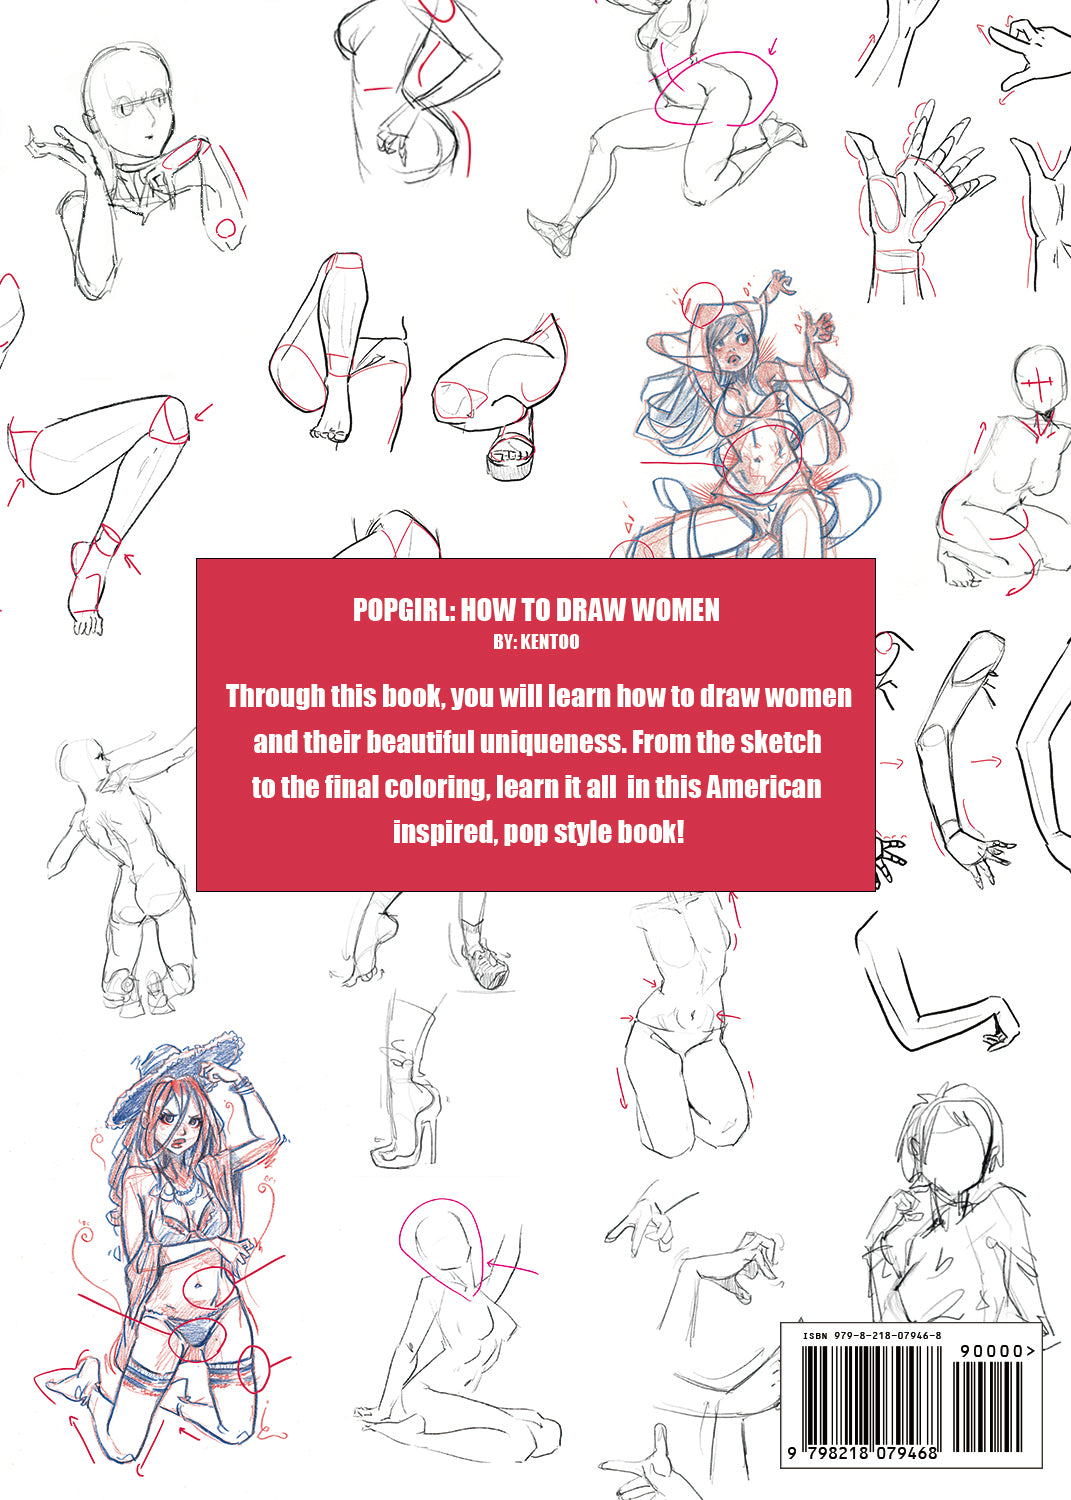 POPGIRL: HOW TO DRAW WOMEN Art eBook Available Now!!